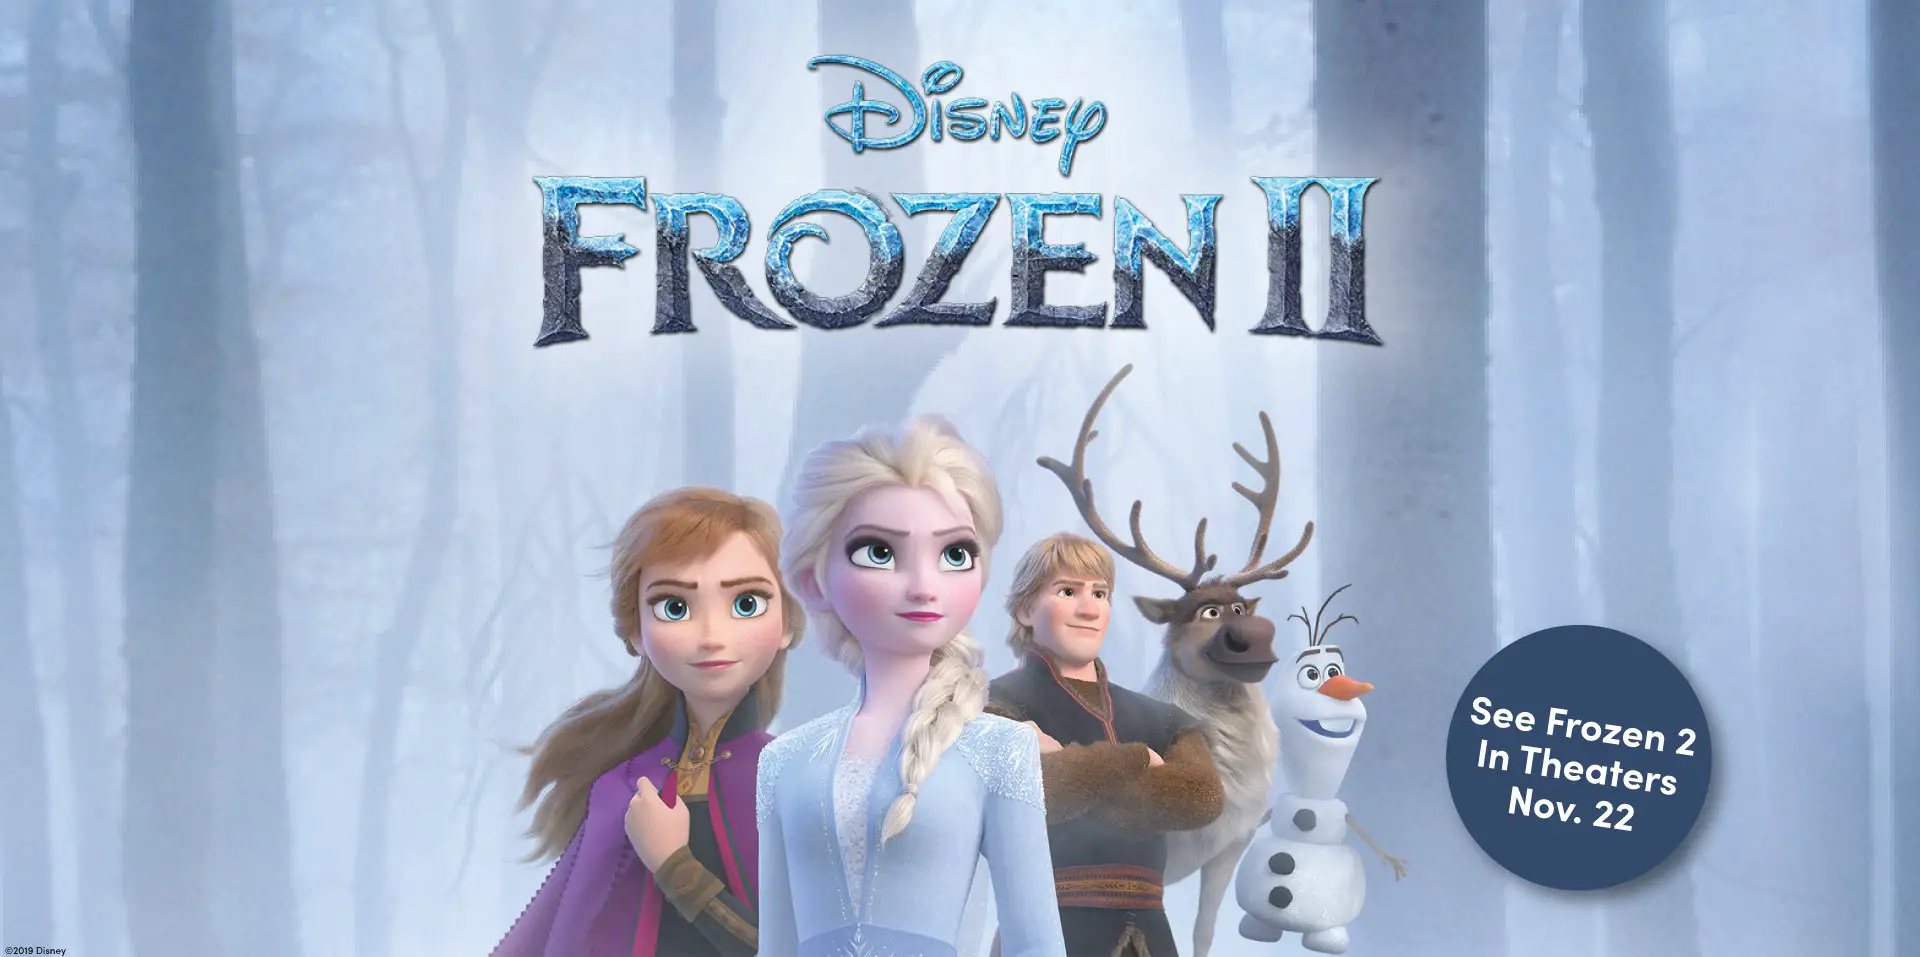 Do you love Disney's FROZEN? Enter Build-A-Bear Workshop's sweepstakes for your chance to win a trip for two to Los Angeles, California to attend the Frozen 2 premiere